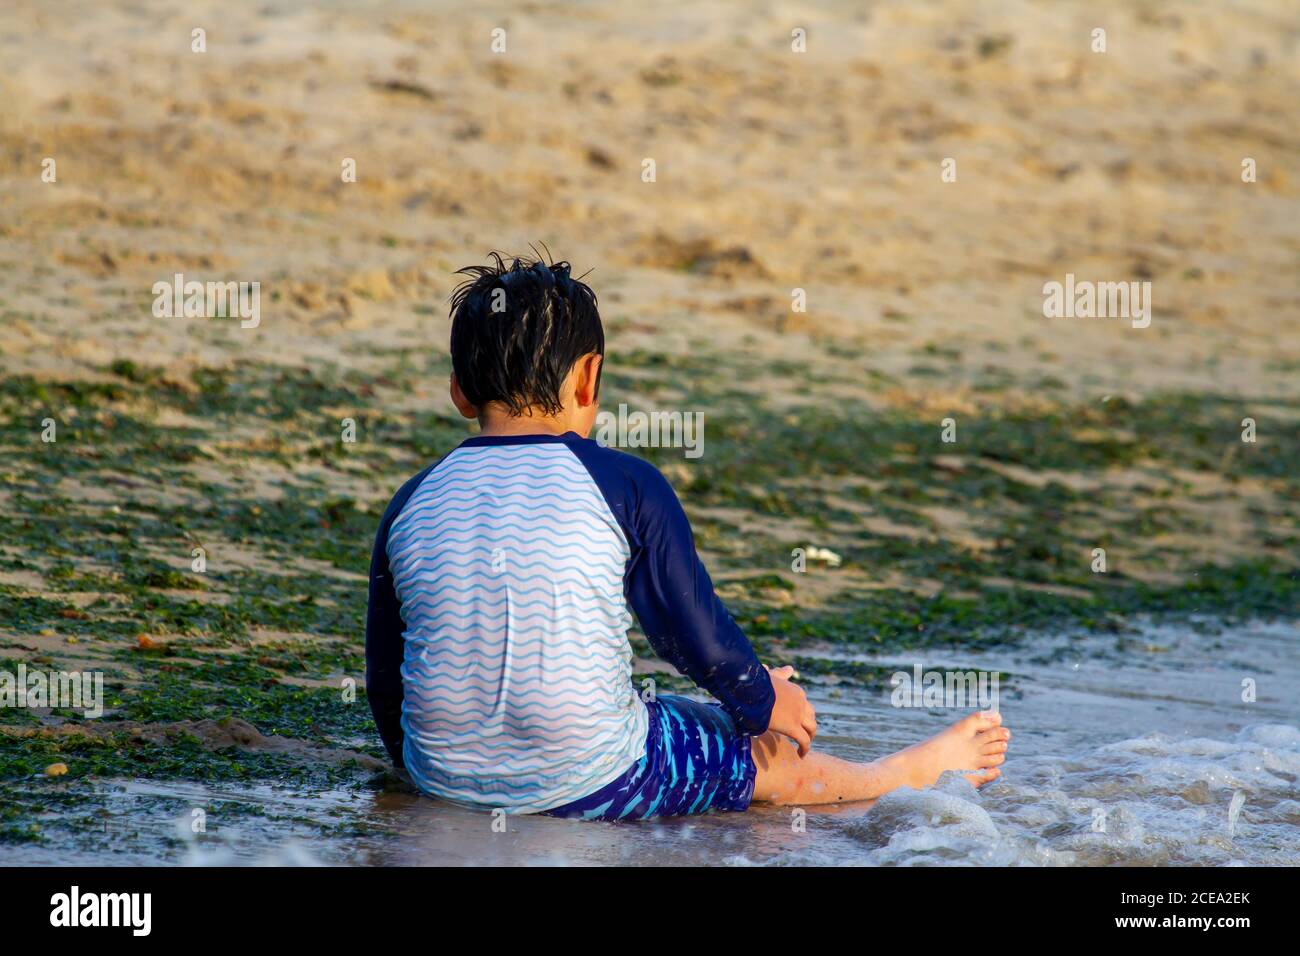 https://c8.alamy.com/comp/2CEA2EK/a-young-caucasian-boy-wearing-rash-guard-long-sleeve-swimsuit-is-sitting-on-sand-by-the-sea-he-is-playing-alone-with-the-sand-and-water-image-was-ta-2CEA2EK.jpg